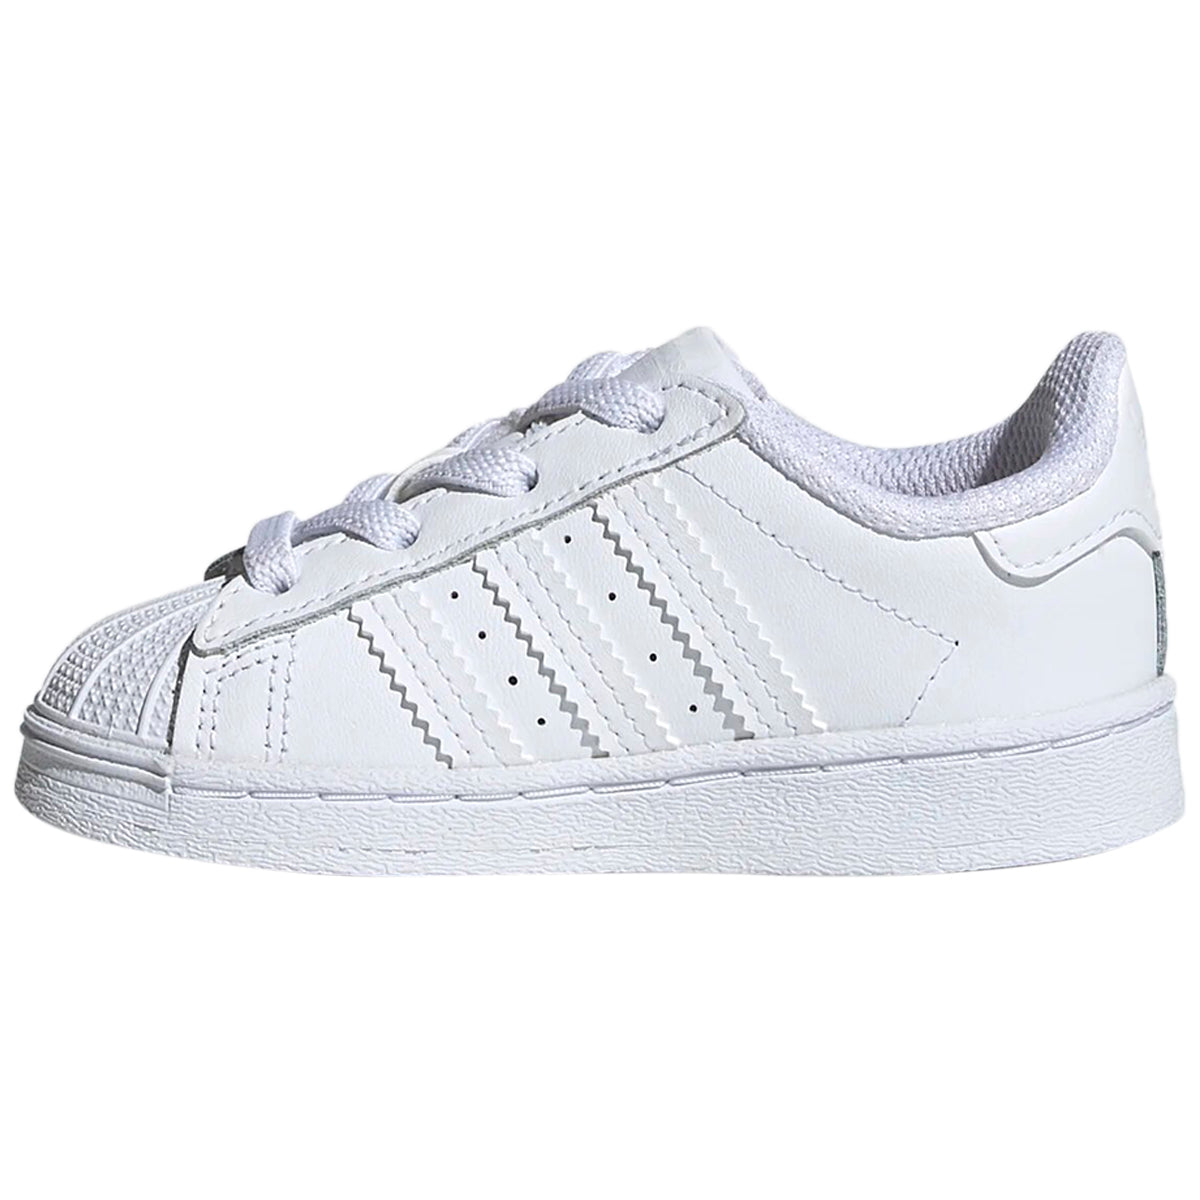 Adidas Superstar Toddlers Style : Ef5397